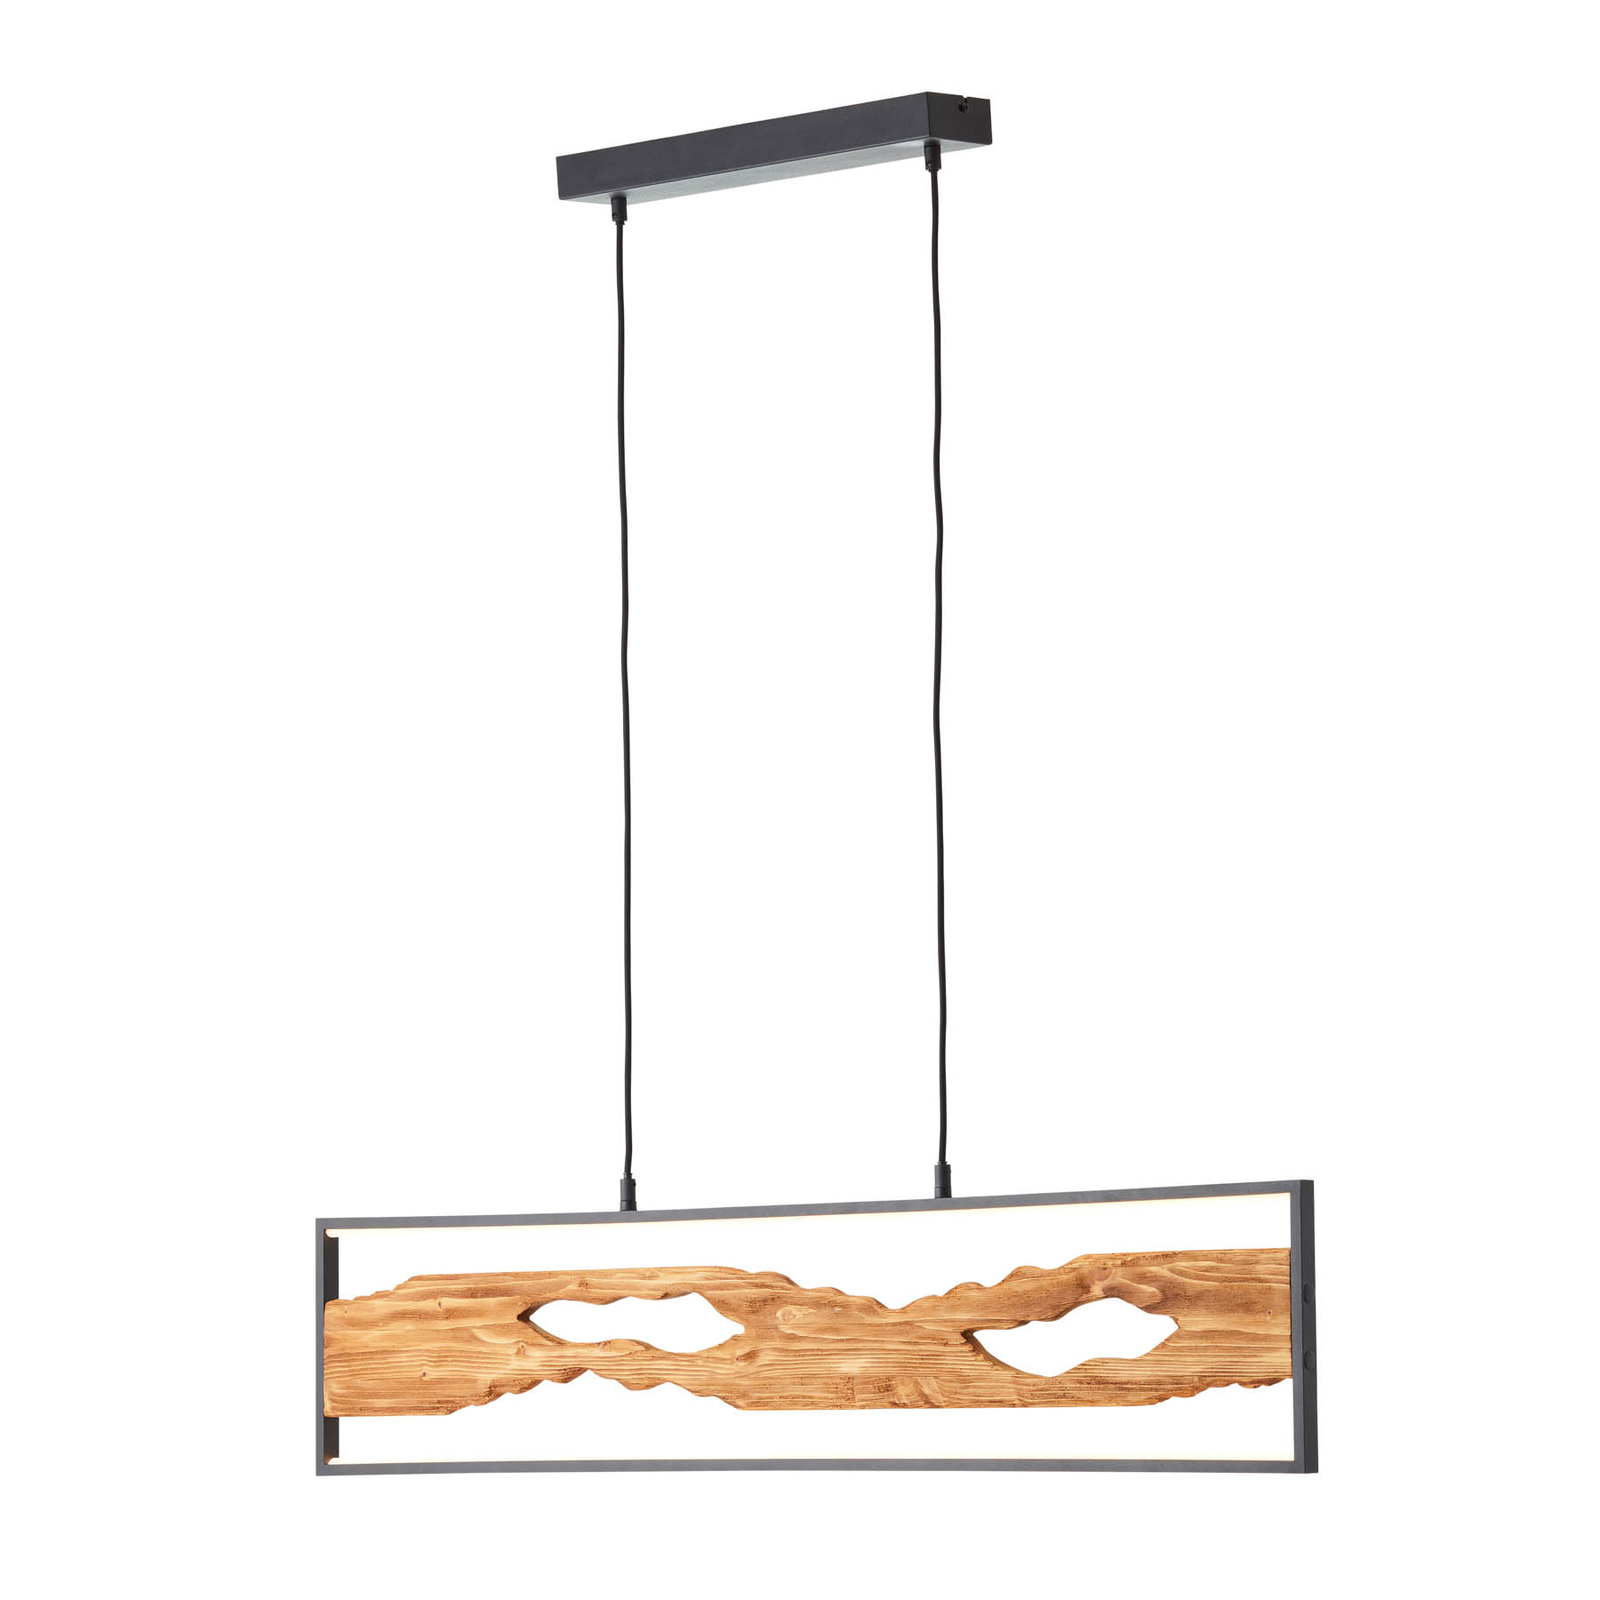 Chaumont LED pendant light made of wood